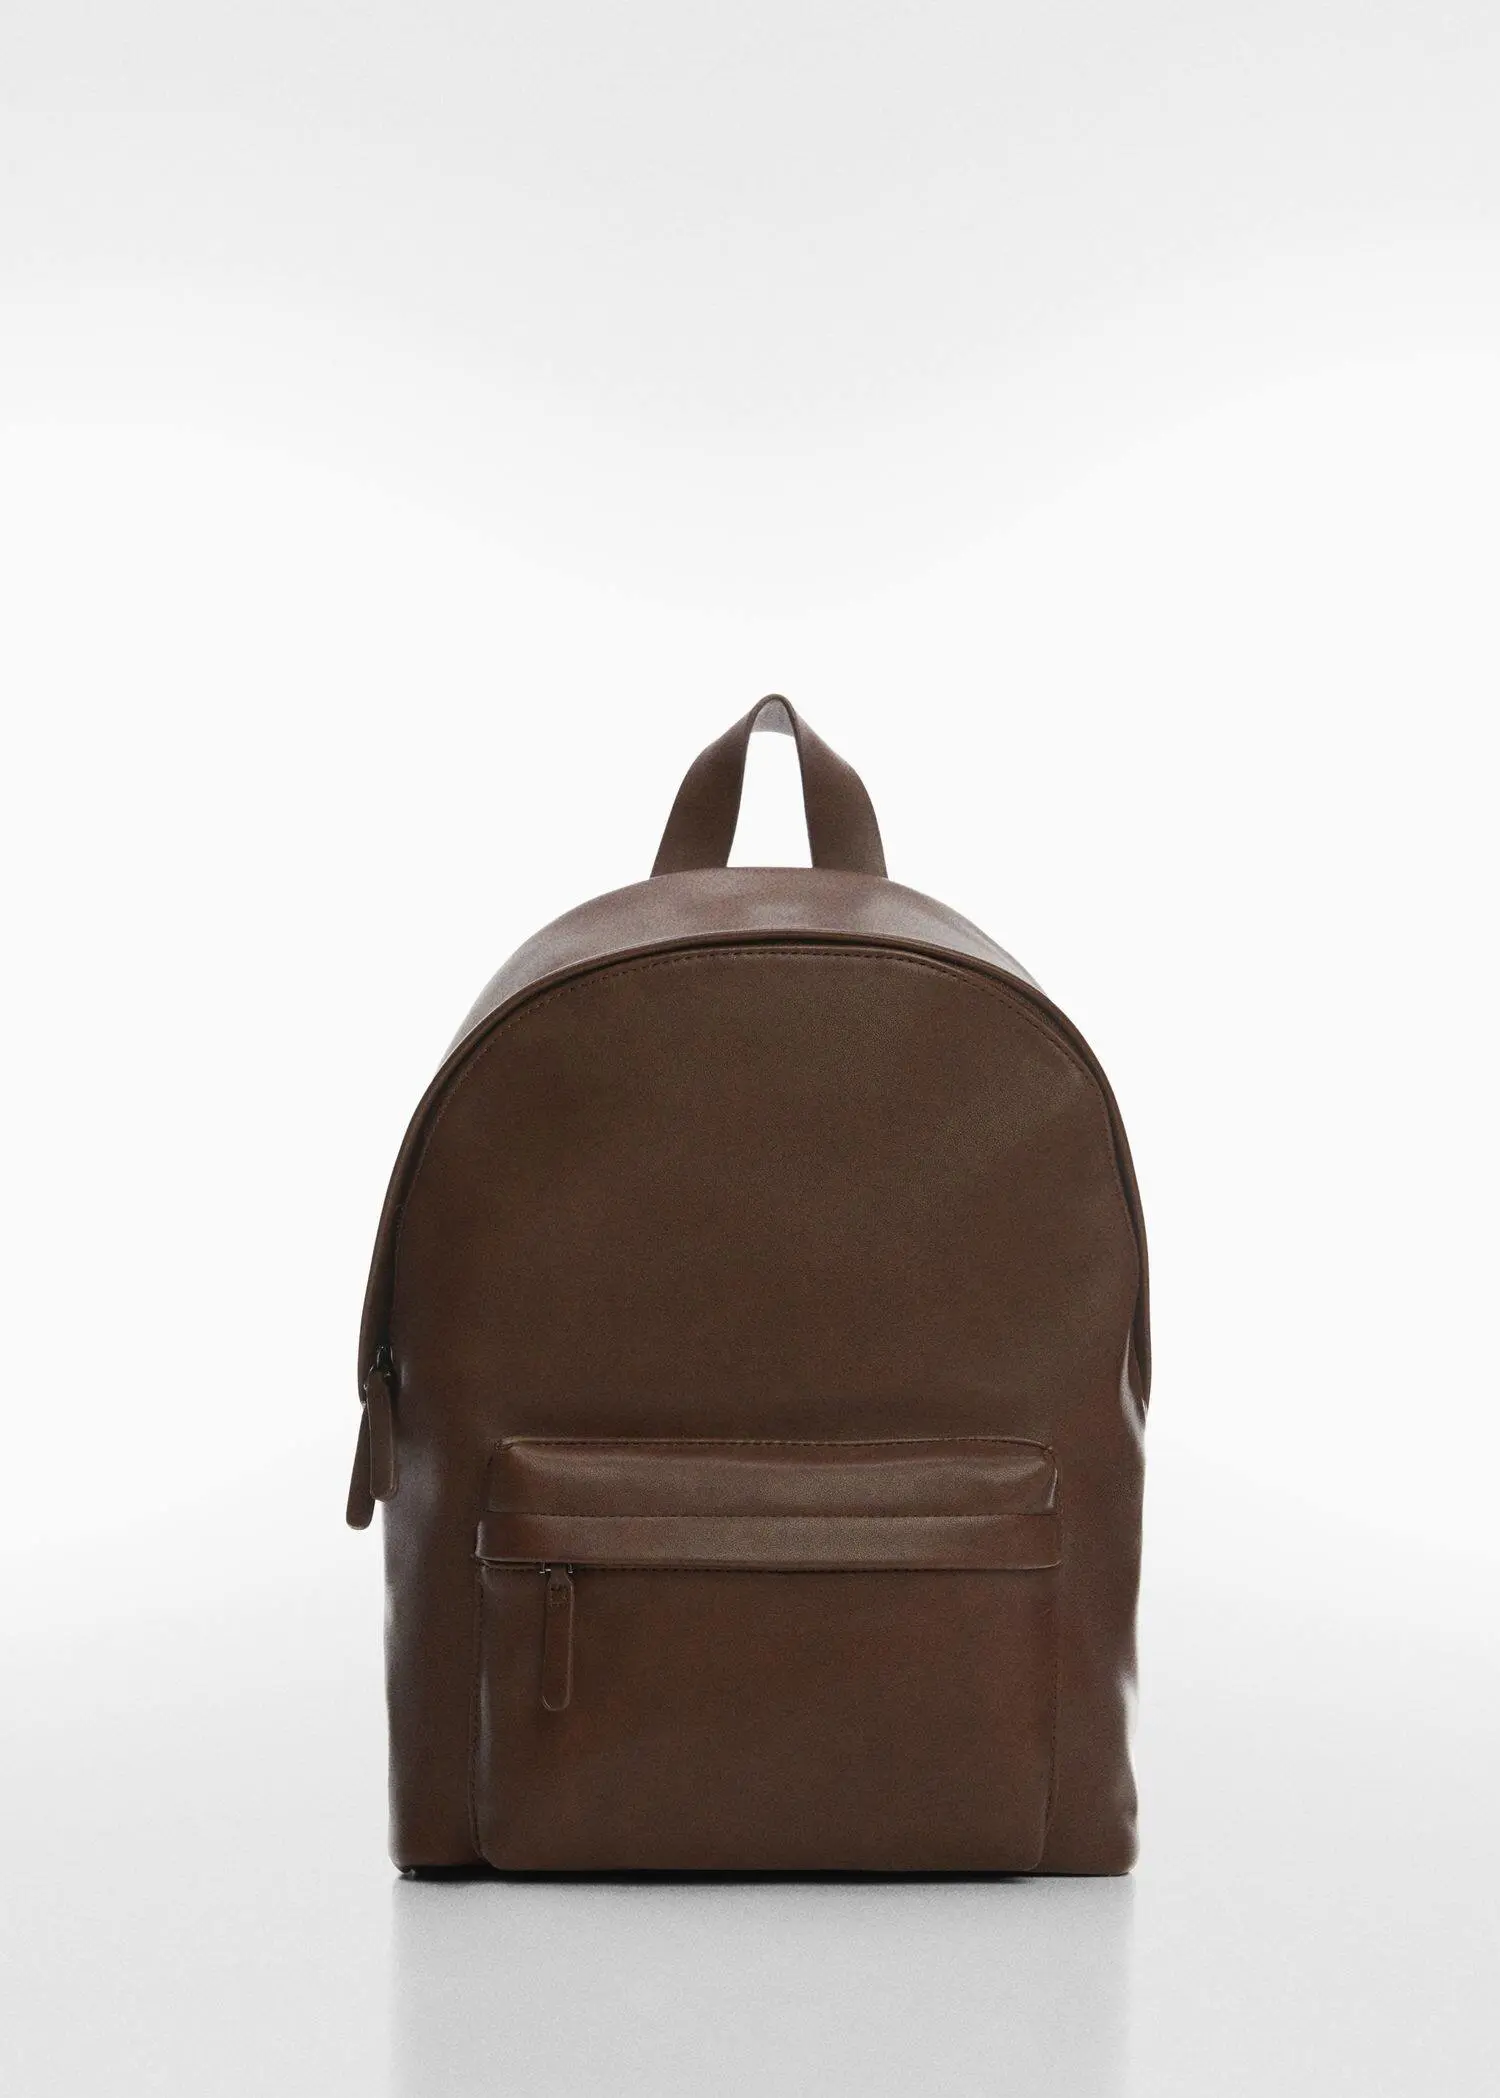 Mango Recycled leather backpack. 1